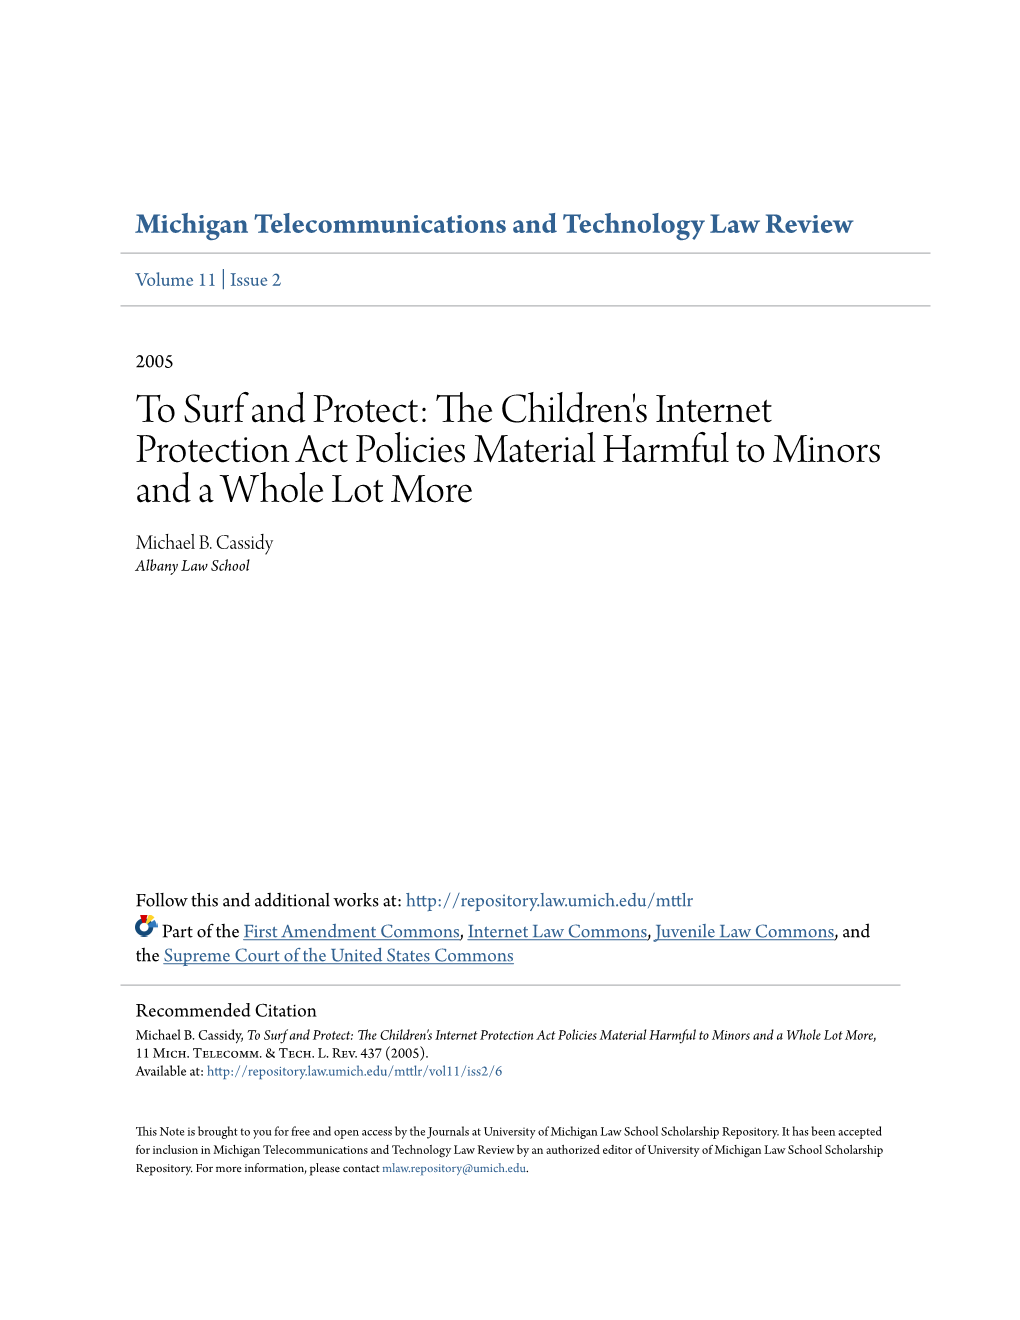 The Children's Internet Protection Act Policies Material Harmful to Minors and a Whole Lot More, 11 Mich